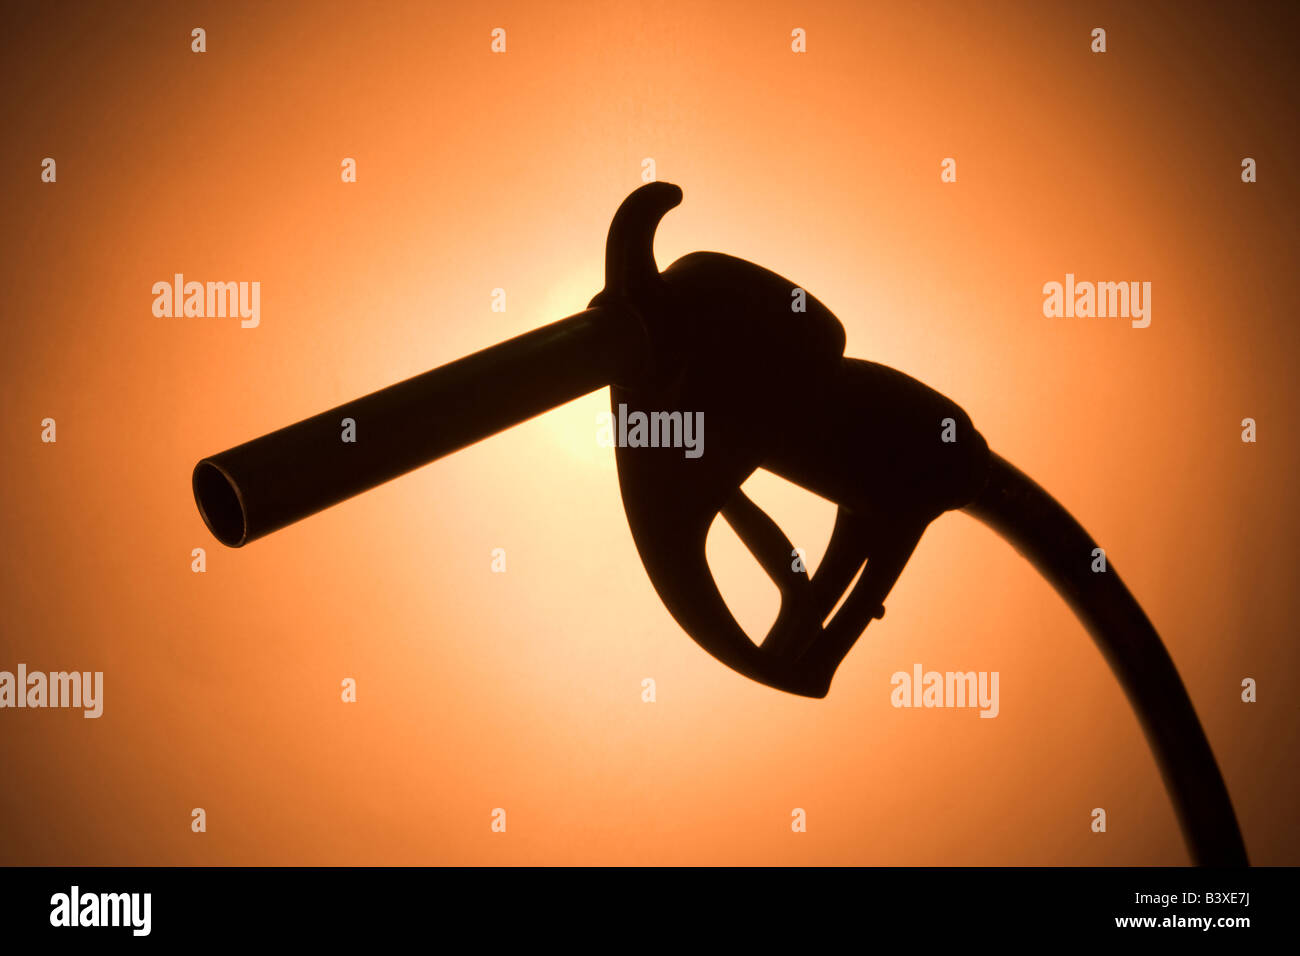 Silhouette Of A Fuel Pump Stock Photo